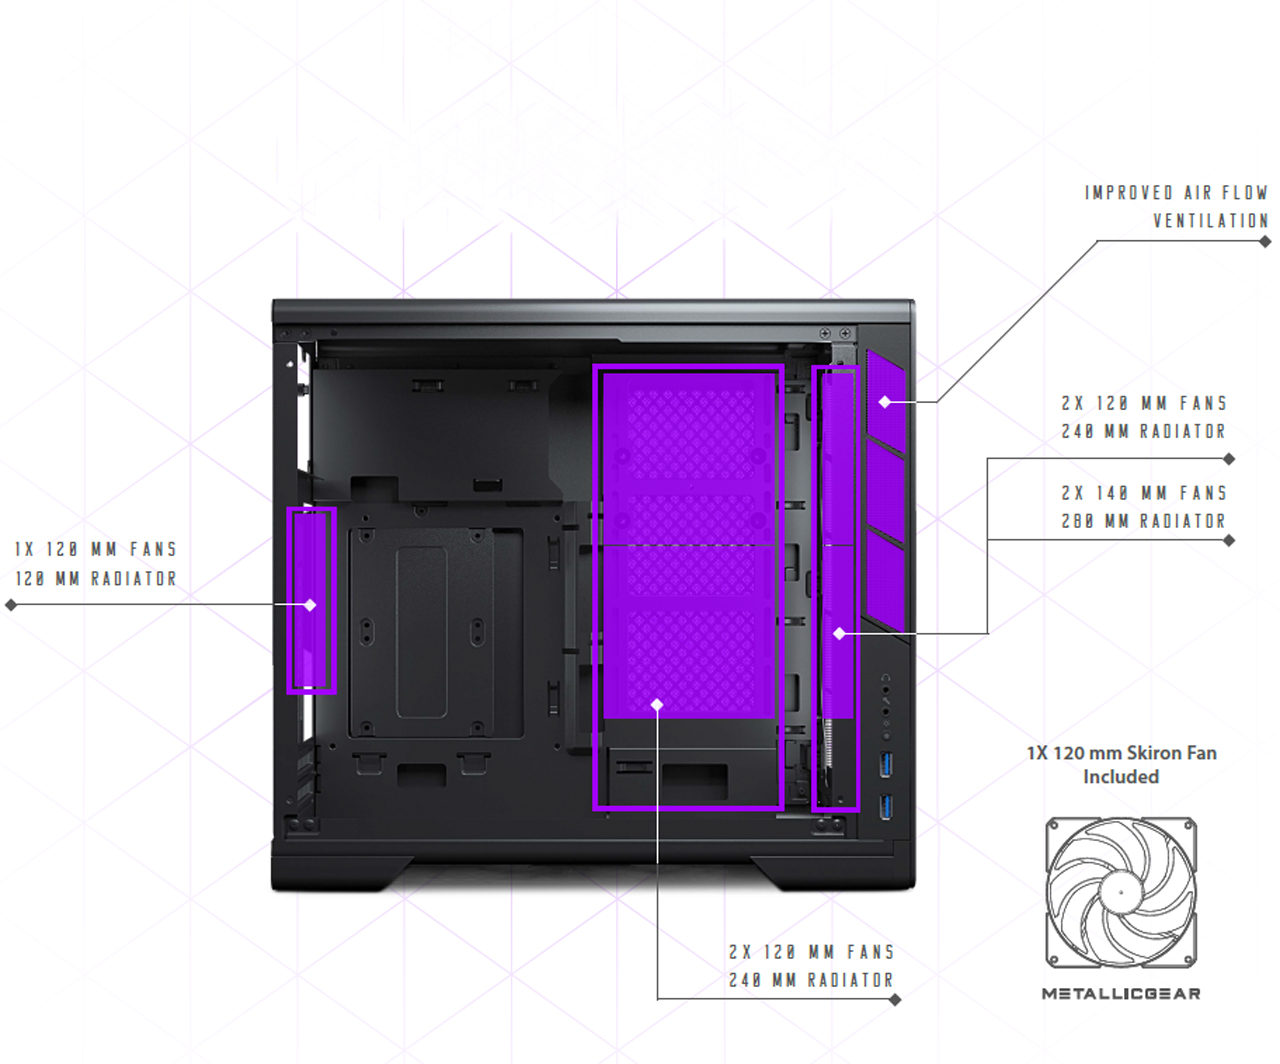 The MetallicGear NEO Mini V2 Fans Radiators installation location labeling and specifications